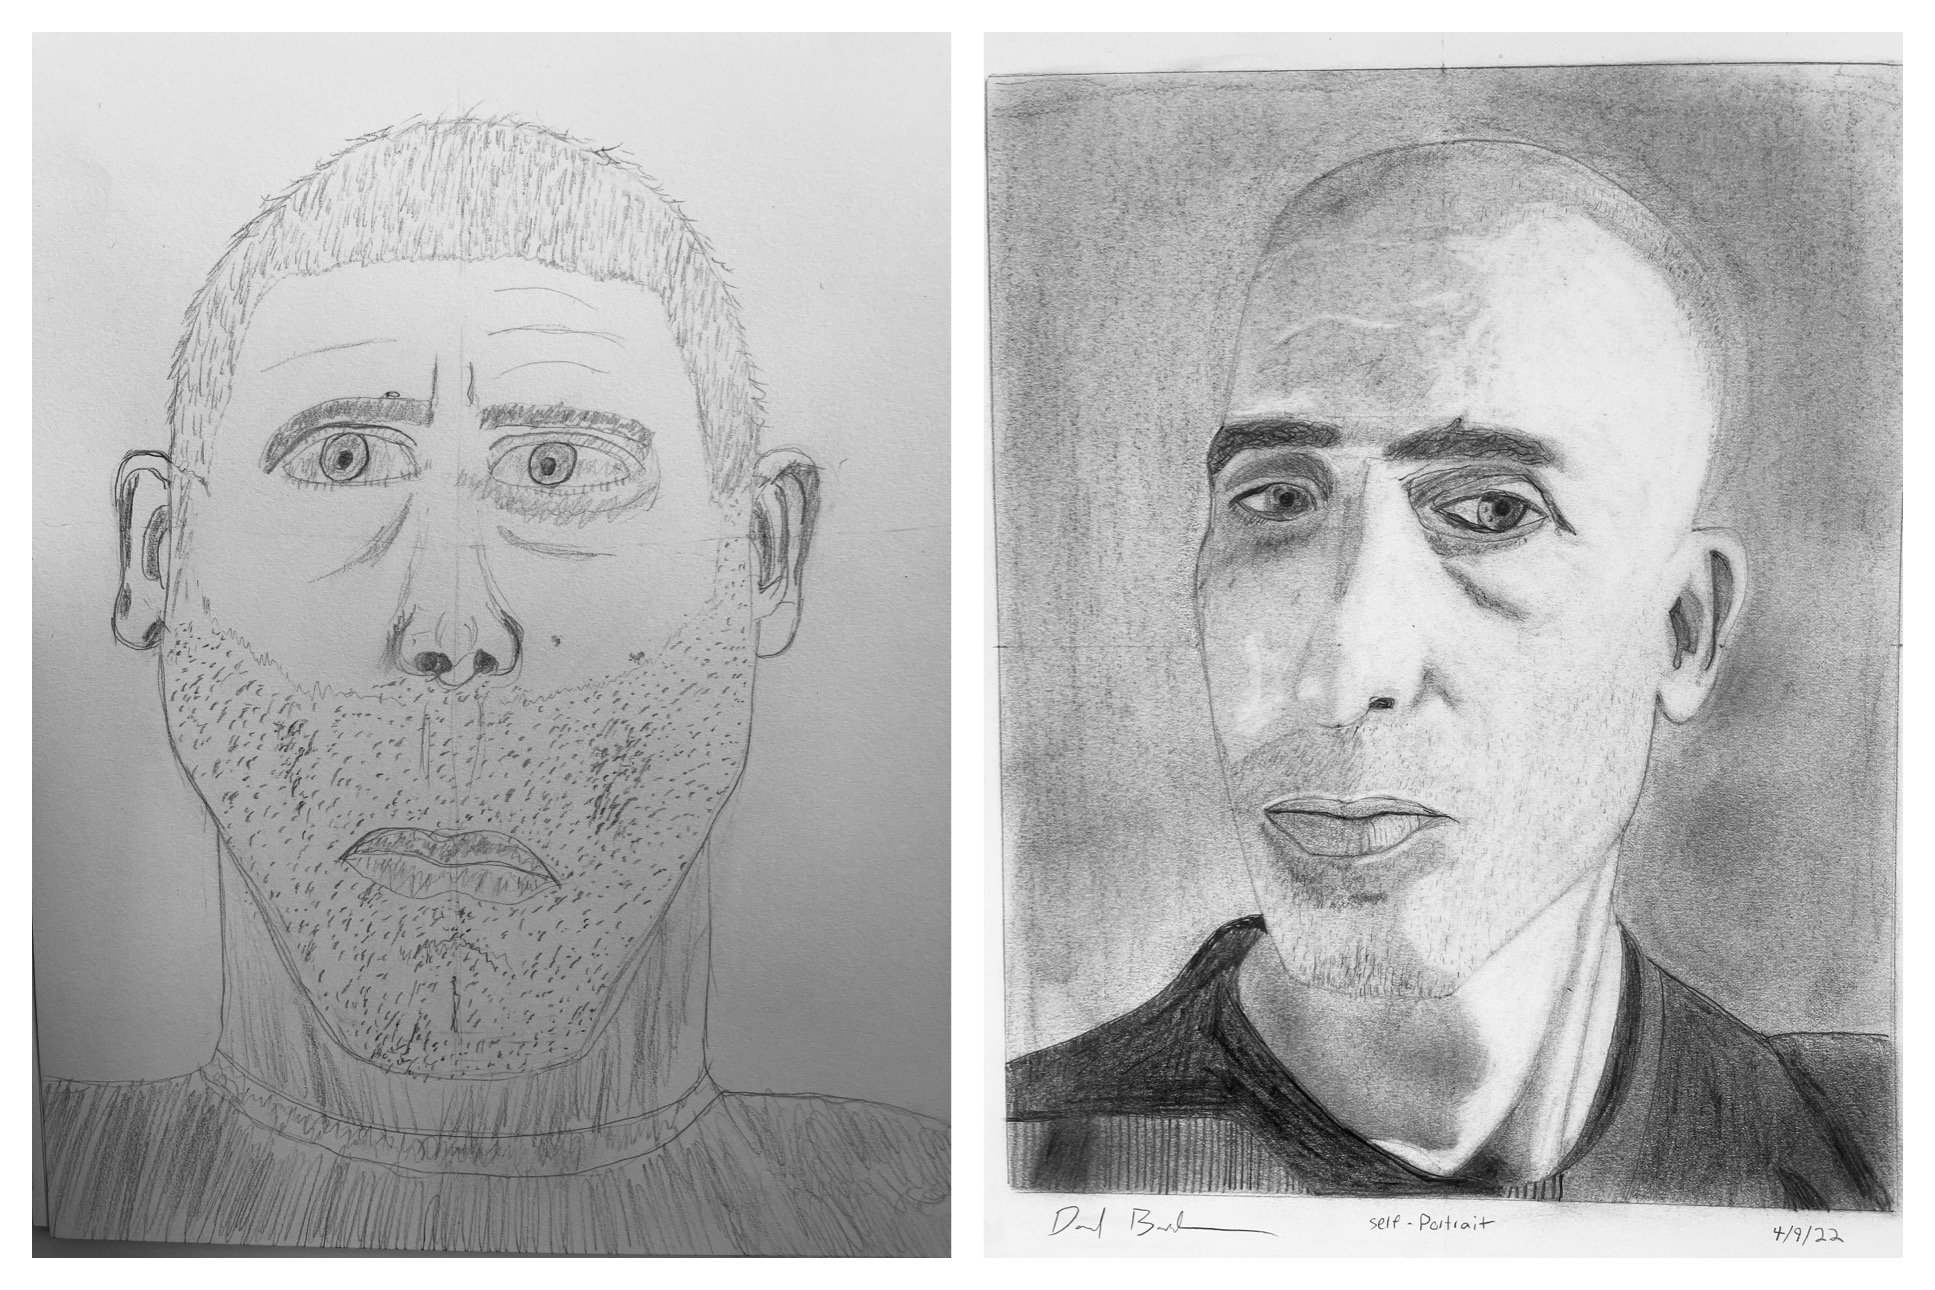 Daniel's Before and After self-portraits April 4-9, 2022